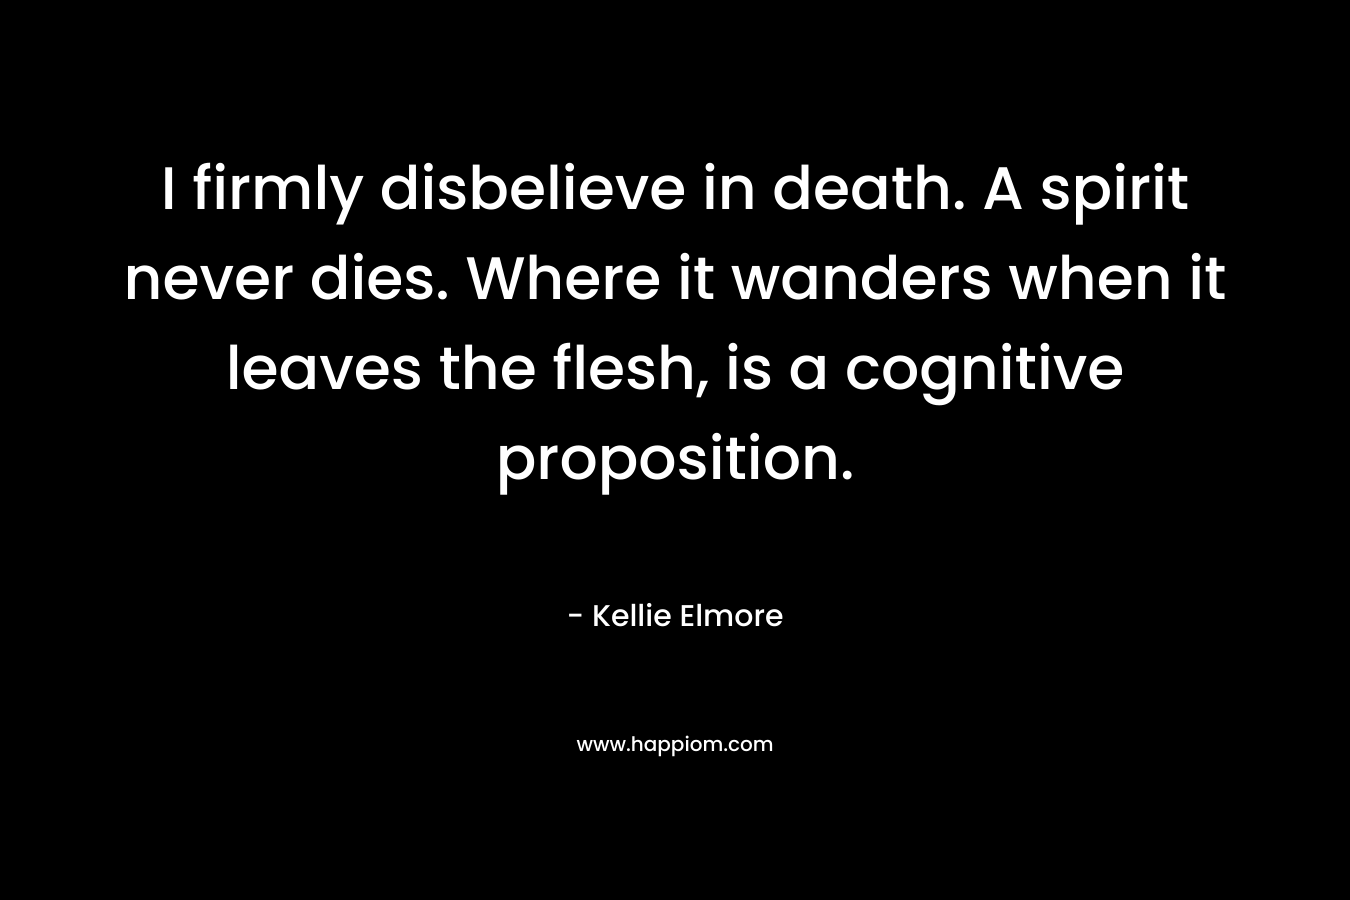 I firmly disbelieve in death. A spirit never dies. Where it wanders when it leaves the flesh, is a cognitive proposition.